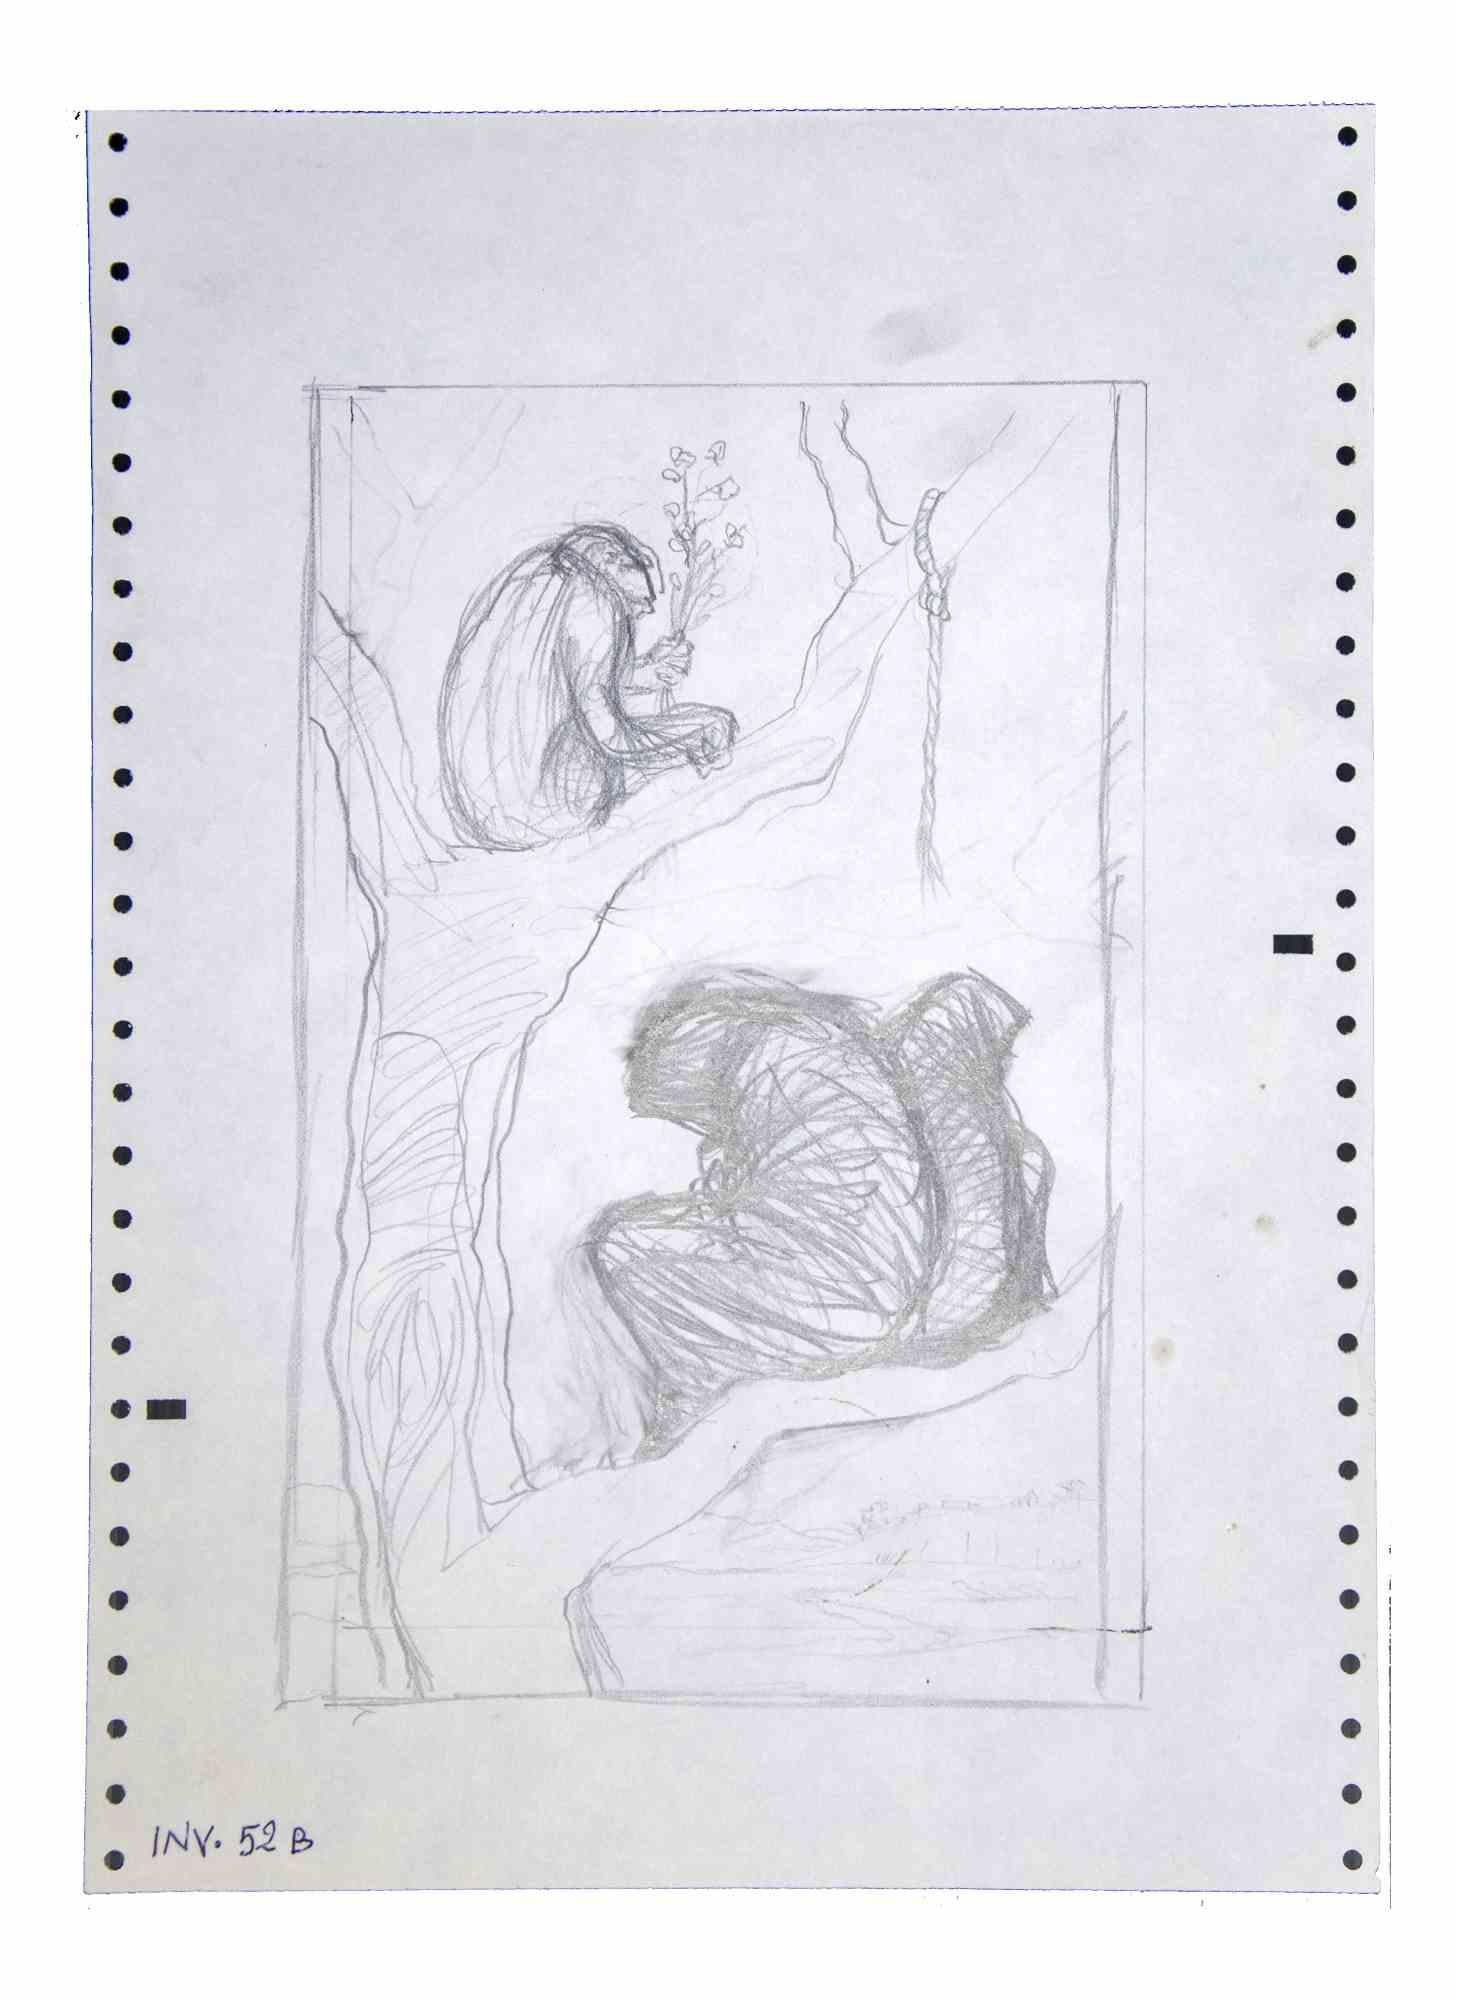 On the Tree is an original artwork realized in the 1970s. by the Italian Contemporary artist  Leo Guida  (1992 - 2017).

Original drawing in pencil on ivory-colored paper.

Good conditions, with slight foxing on the right.

Leo Guida  (1992 - 2017).